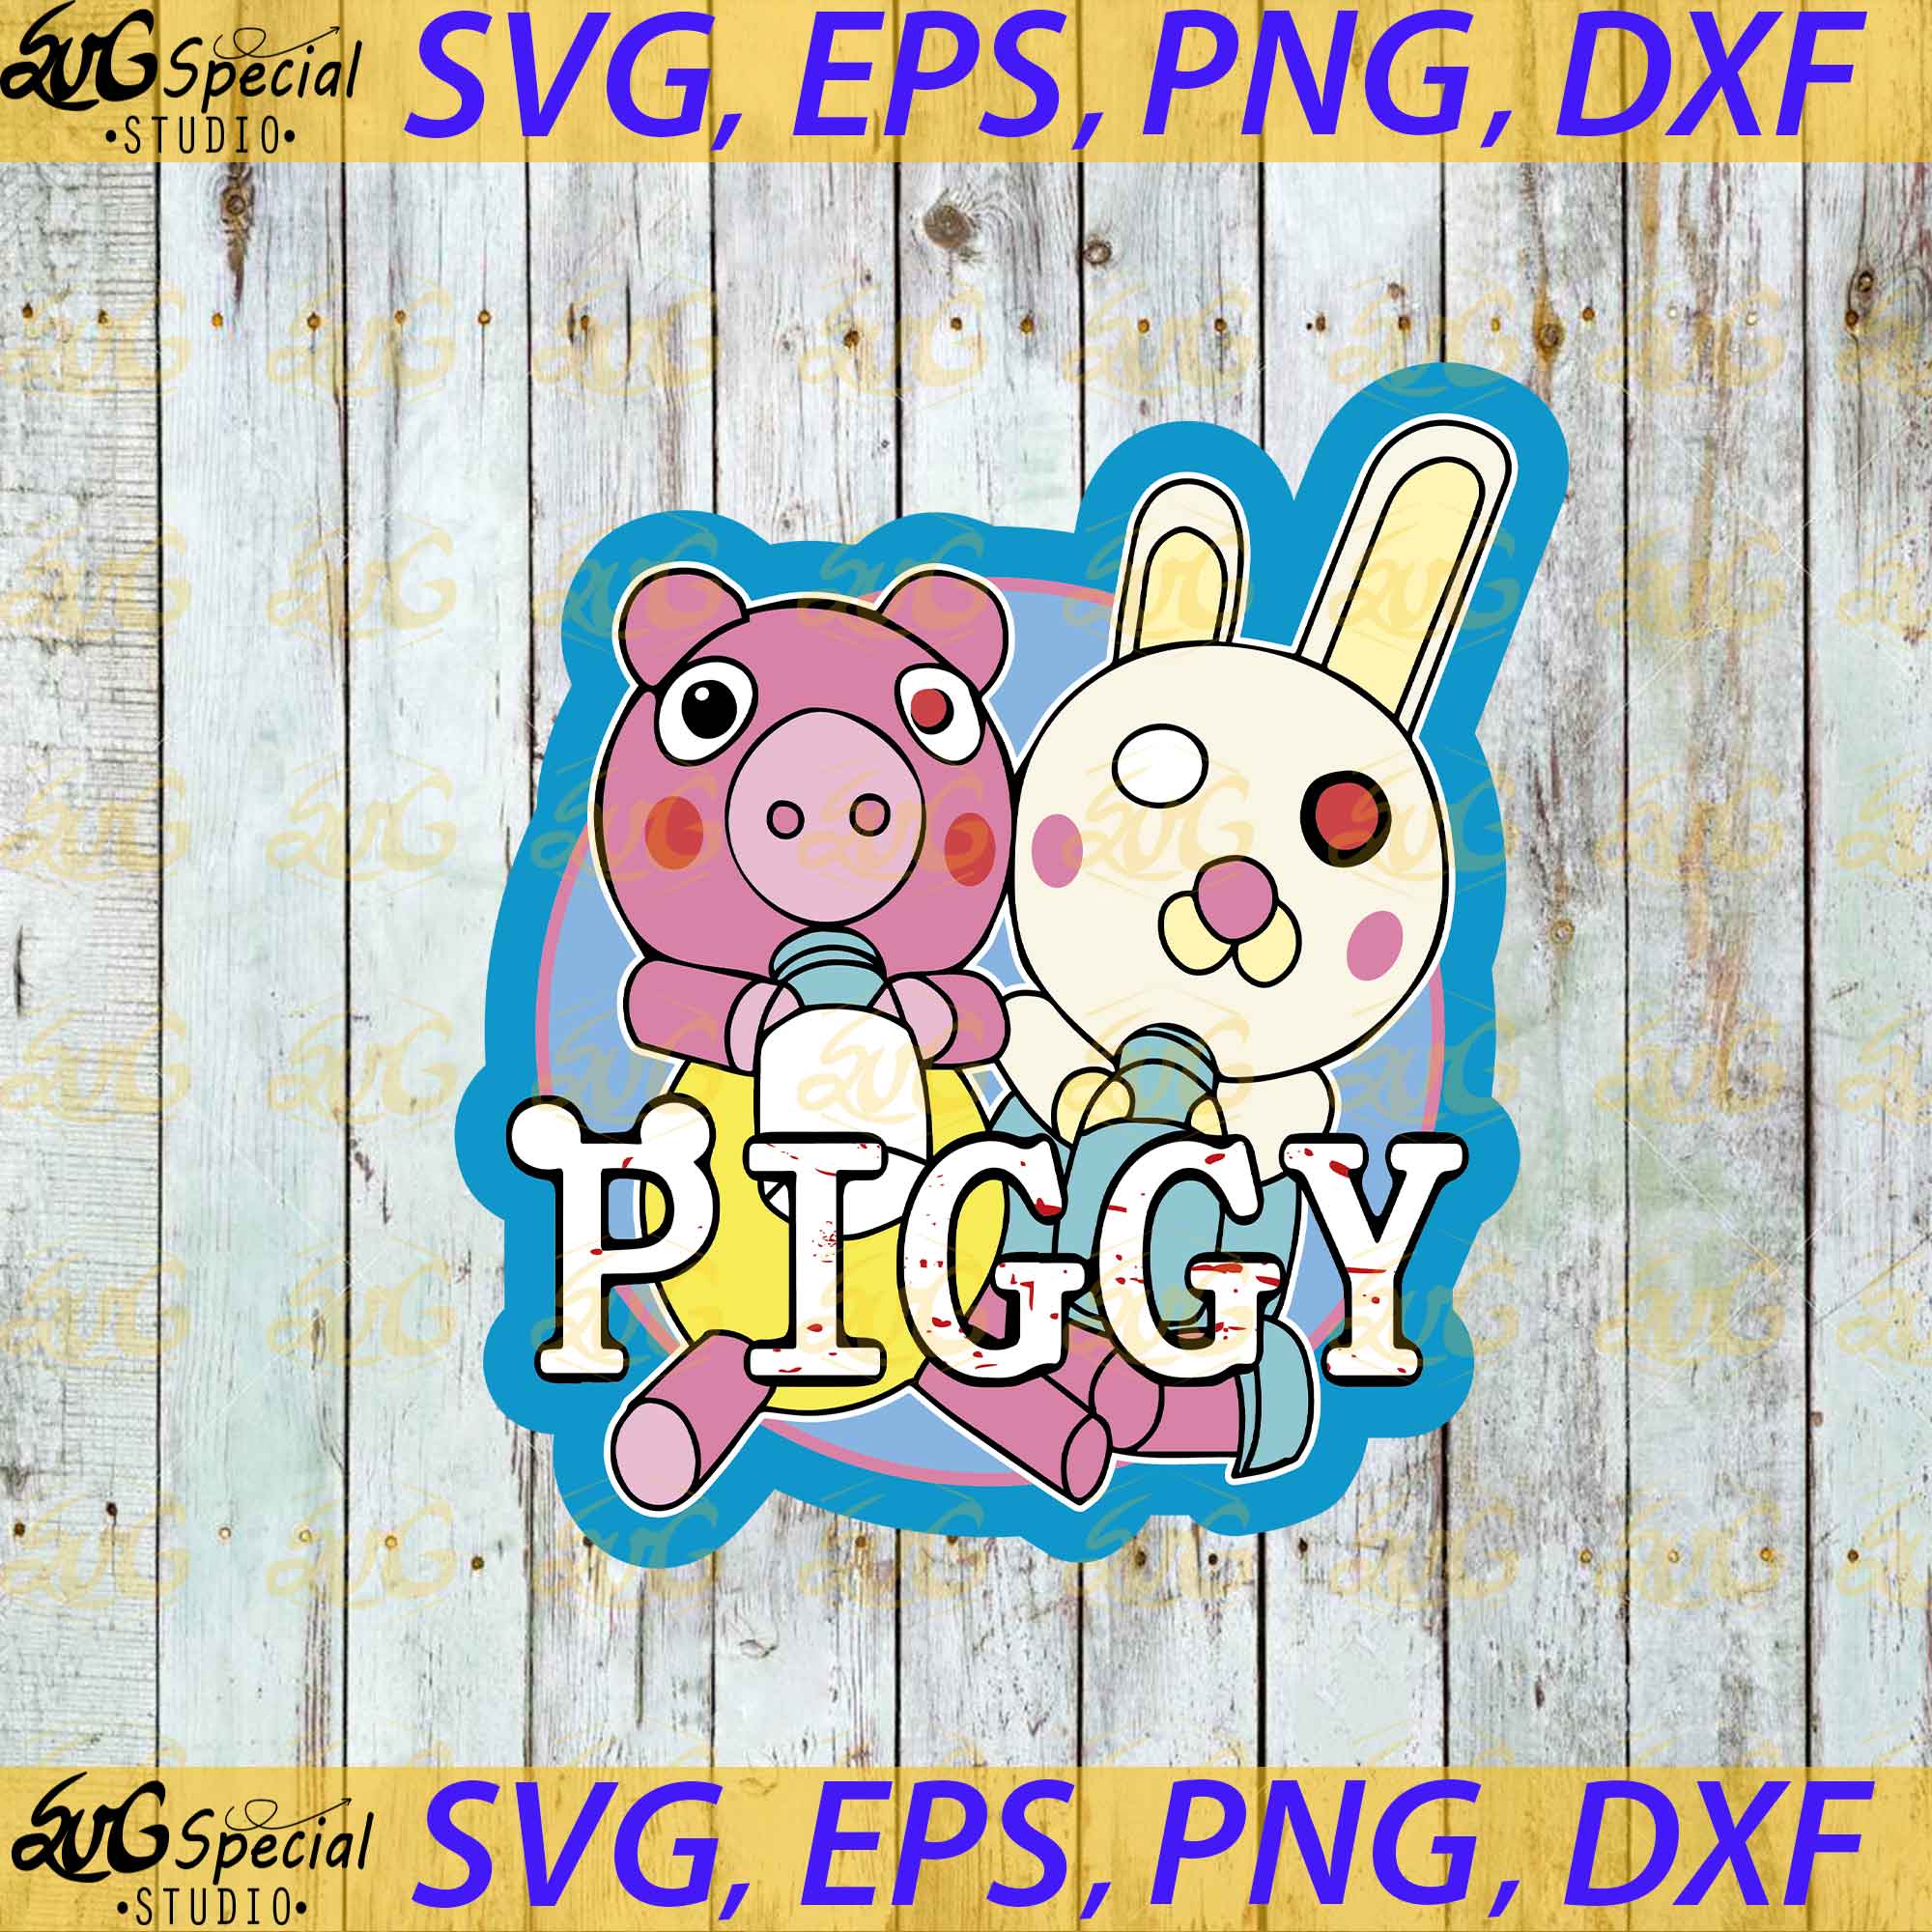 Piggy Roblox Svg, Roblox Game Svg, Roblox Characters Svg, Pi - Inspire  Uplift